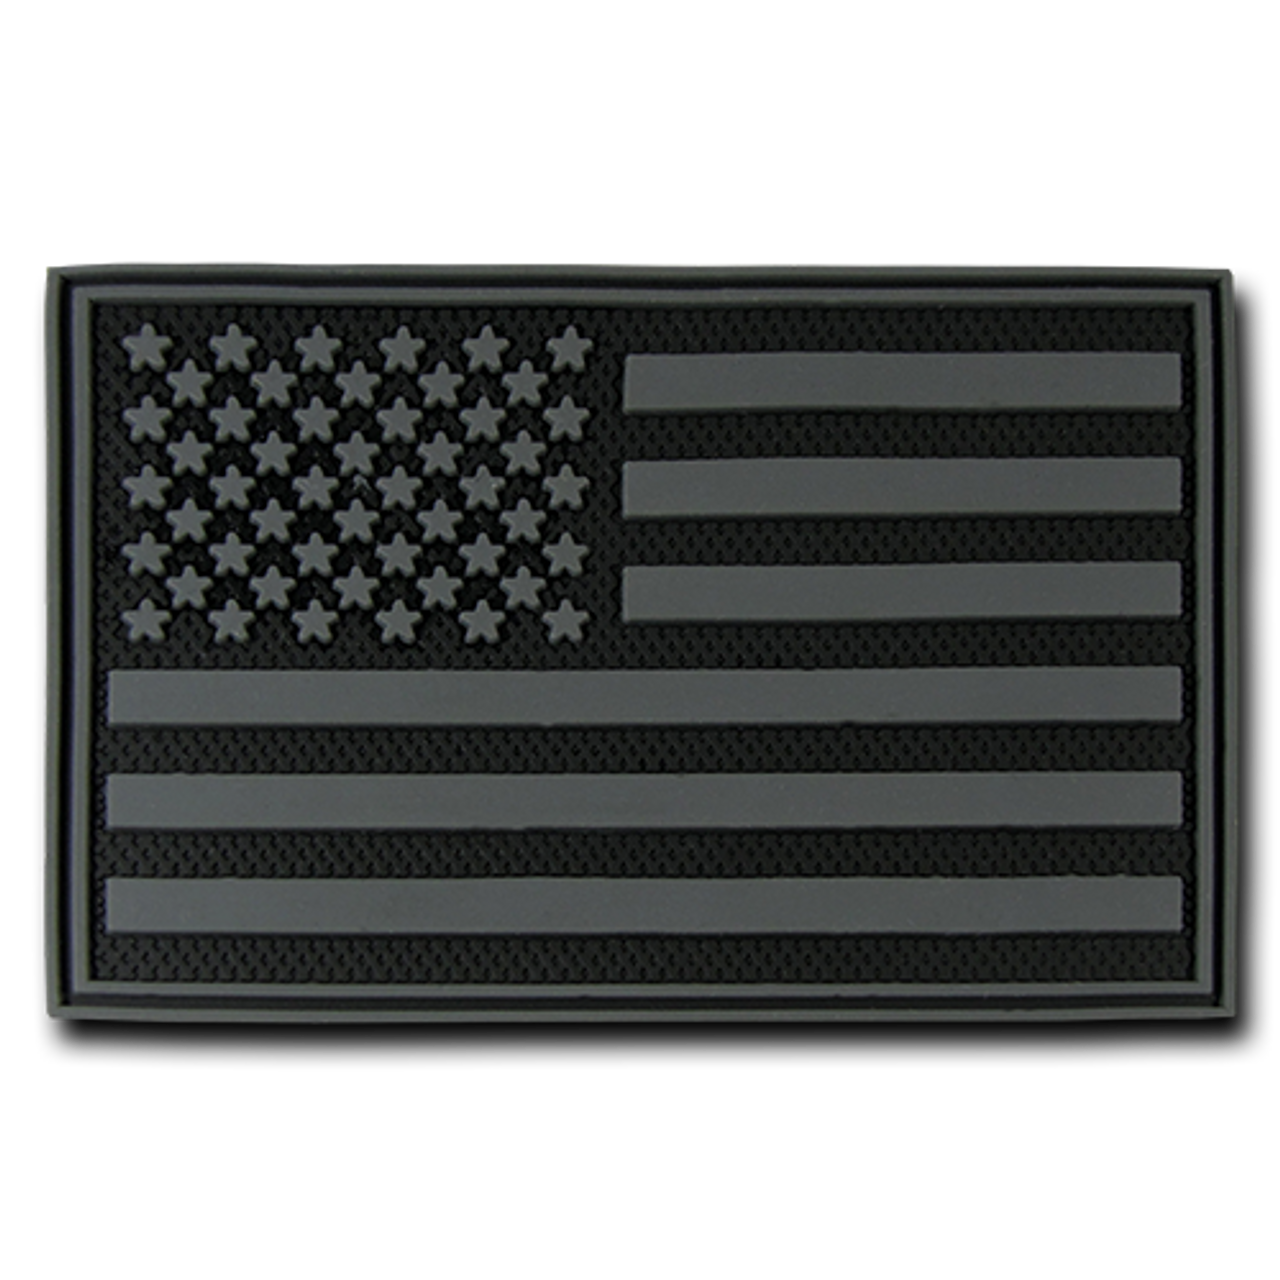 T90 - Tactical Patch - USA Flag - Rubber (3x2) - Subdued Black